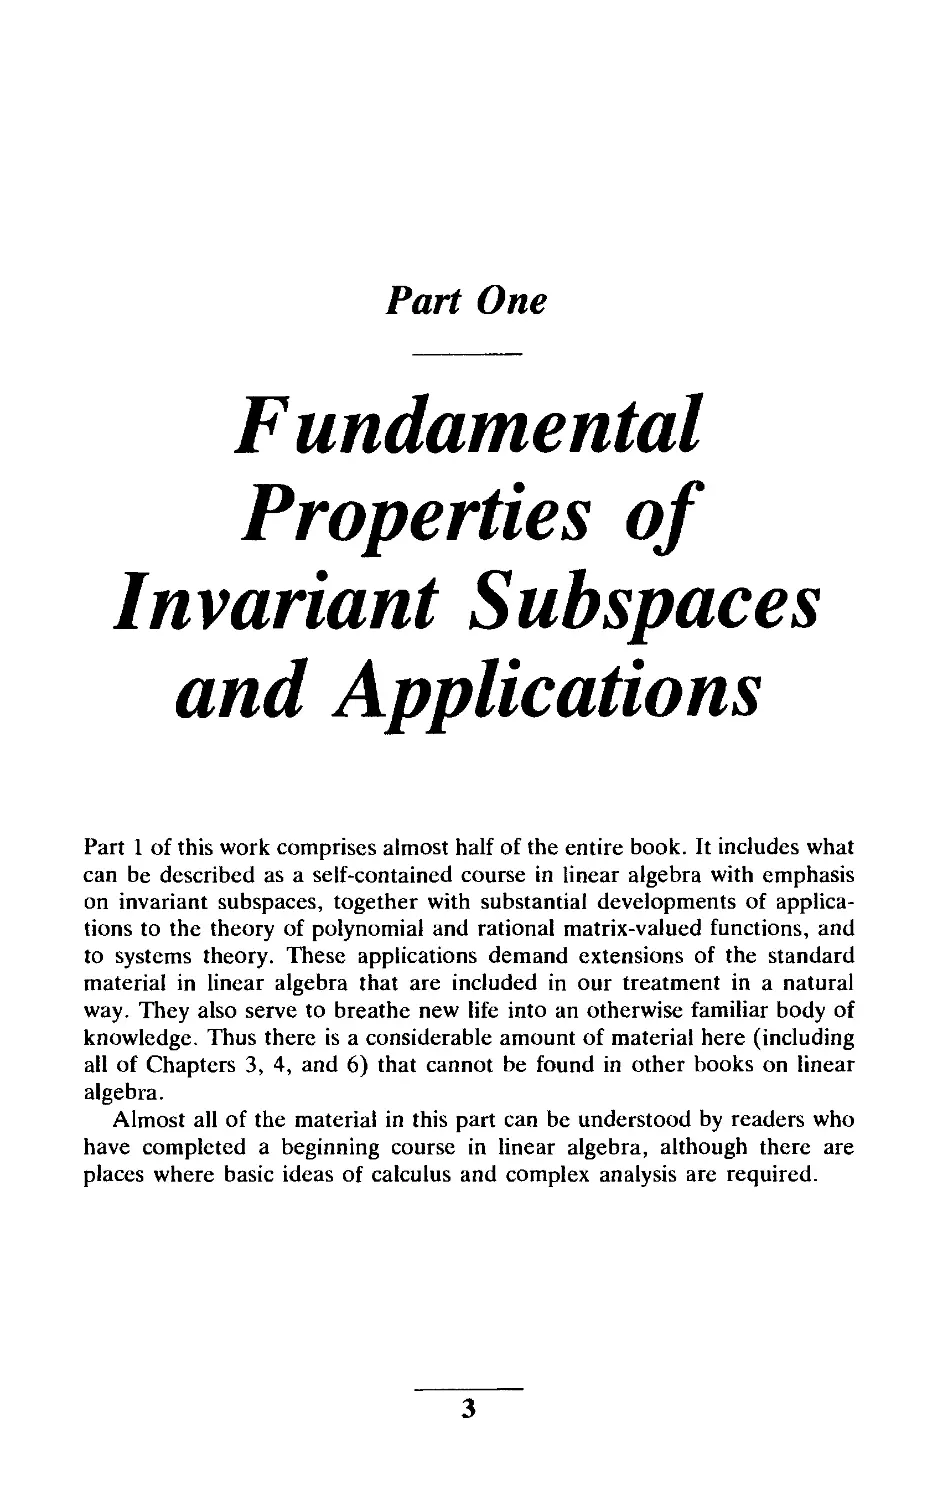 Part One Fundamental Properties of Invariant Subspaces and Applications